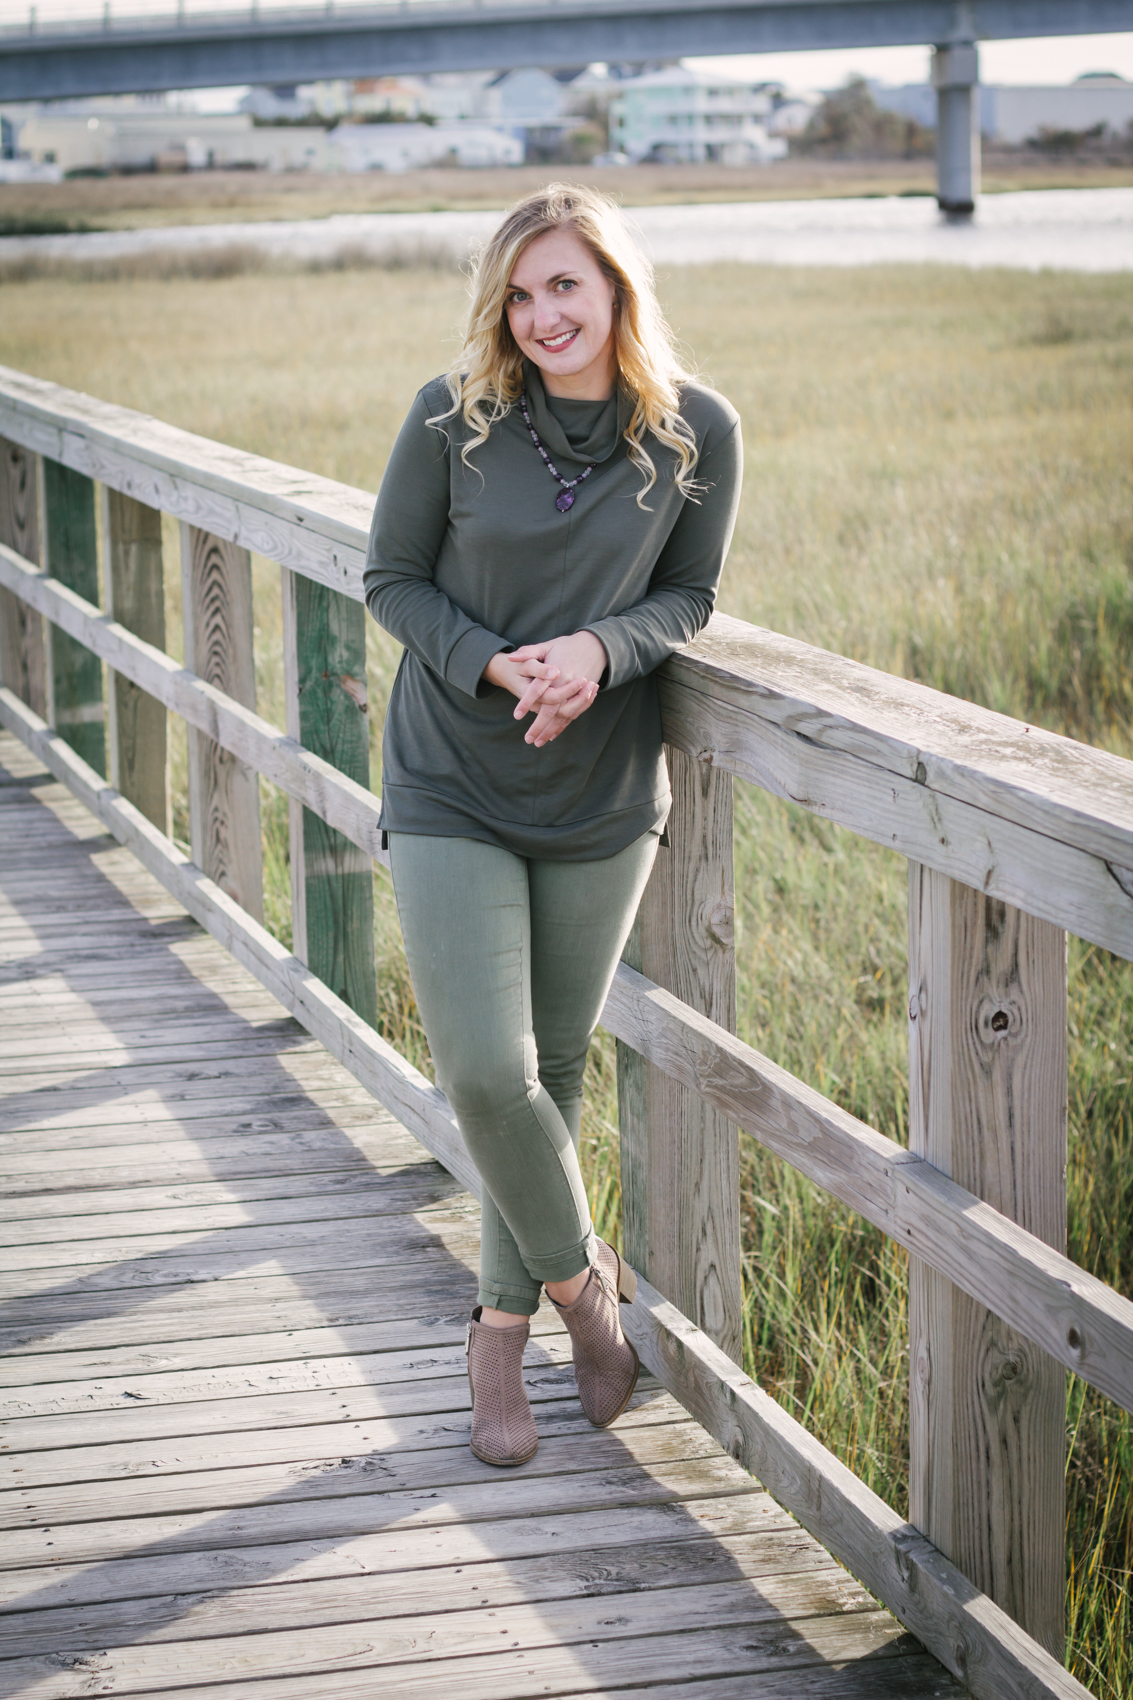 If you're running low on time or mental capacity, a monochrome outfit is the easiest way to an elevated and chic look. Here's an olive green casual option featuring a genuine gemstone necklace from Shaman Sisters. 